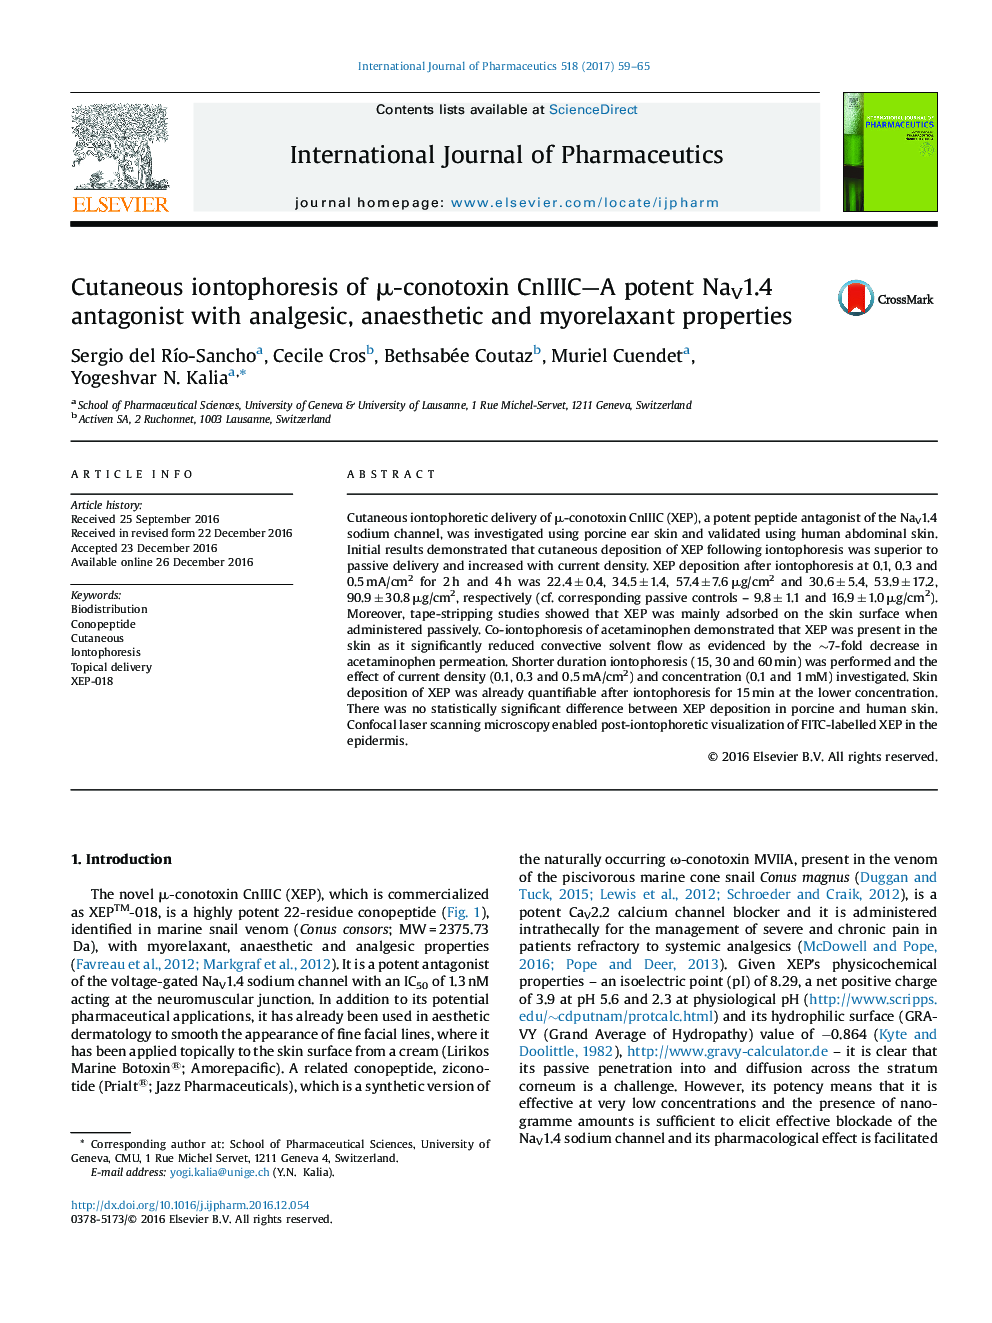 Cutaneous iontophoresis of Î¼-conotoxin CnIIIC-A potent NaV1.4 antagonist with analgesic, anaesthetic and myorelaxant properties